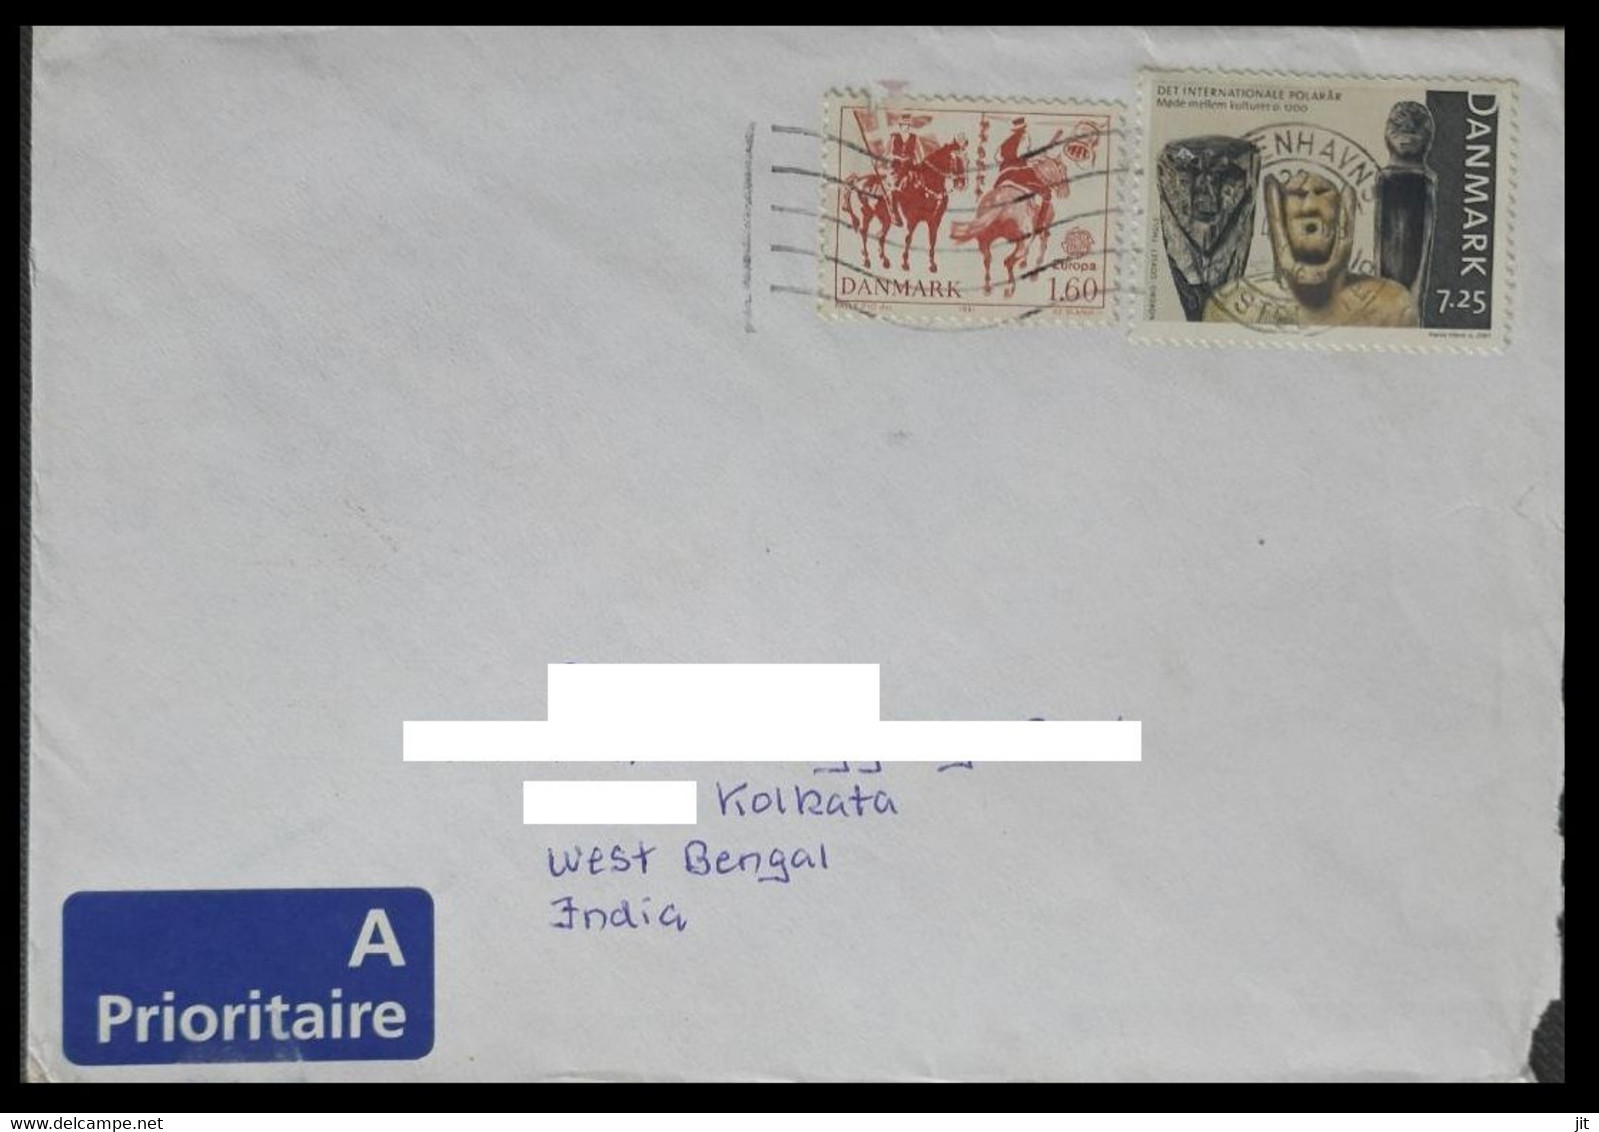 165.DENMARK USED AIRMAIL COVER TO INDIA WITH STAMPS ,EUROPA, HORSE. - Briefe U. Dokumente